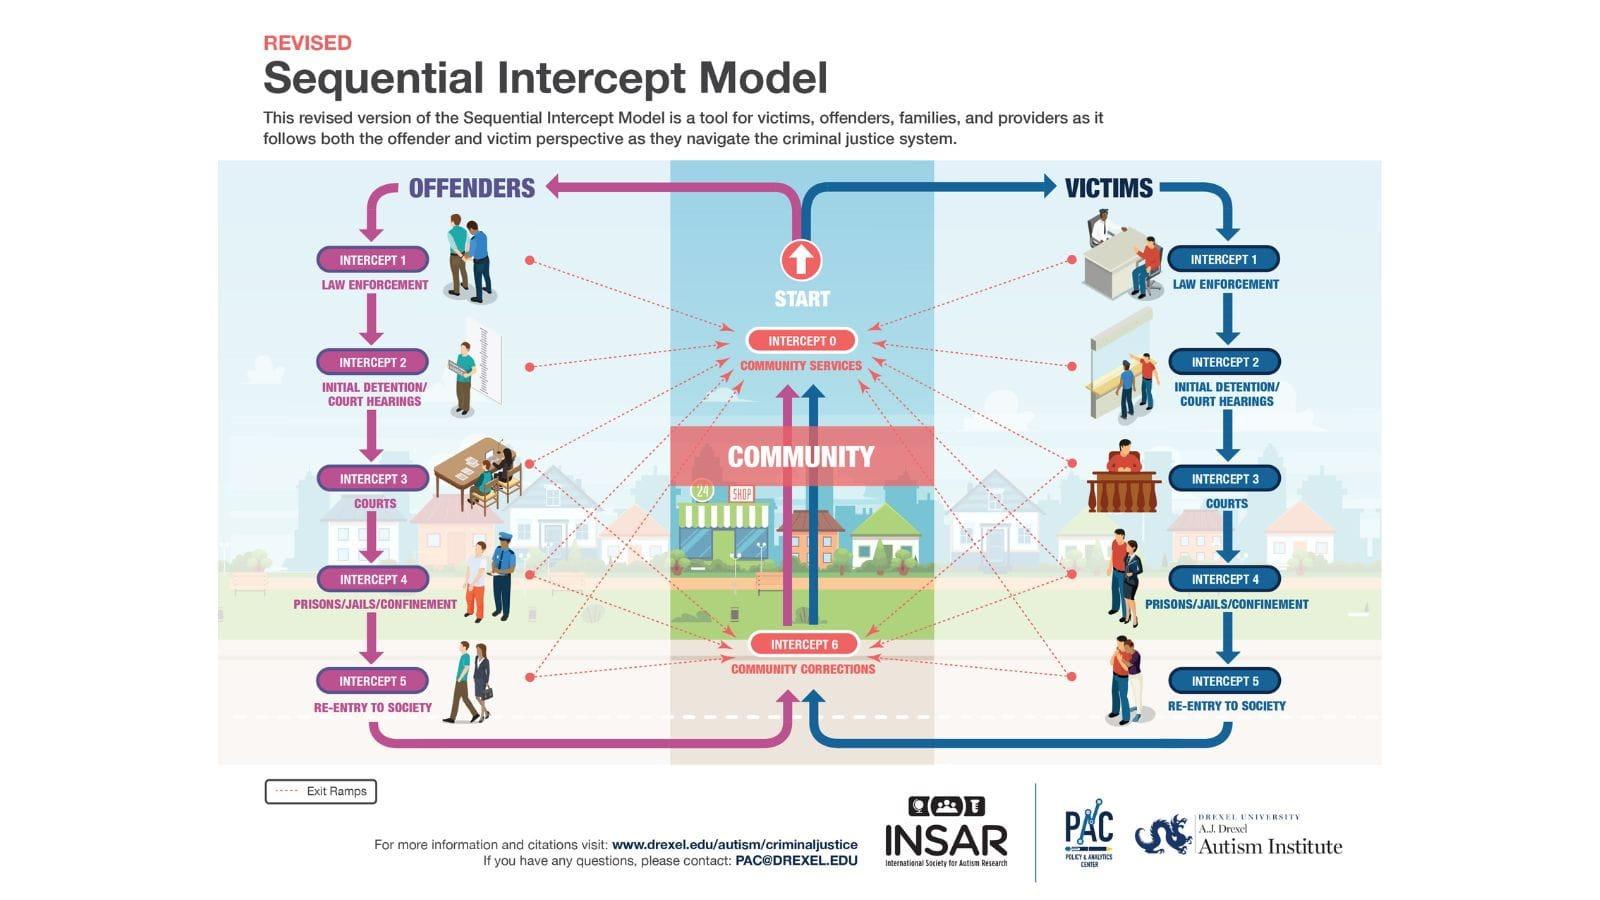 Infographic on revised sequential intercept model